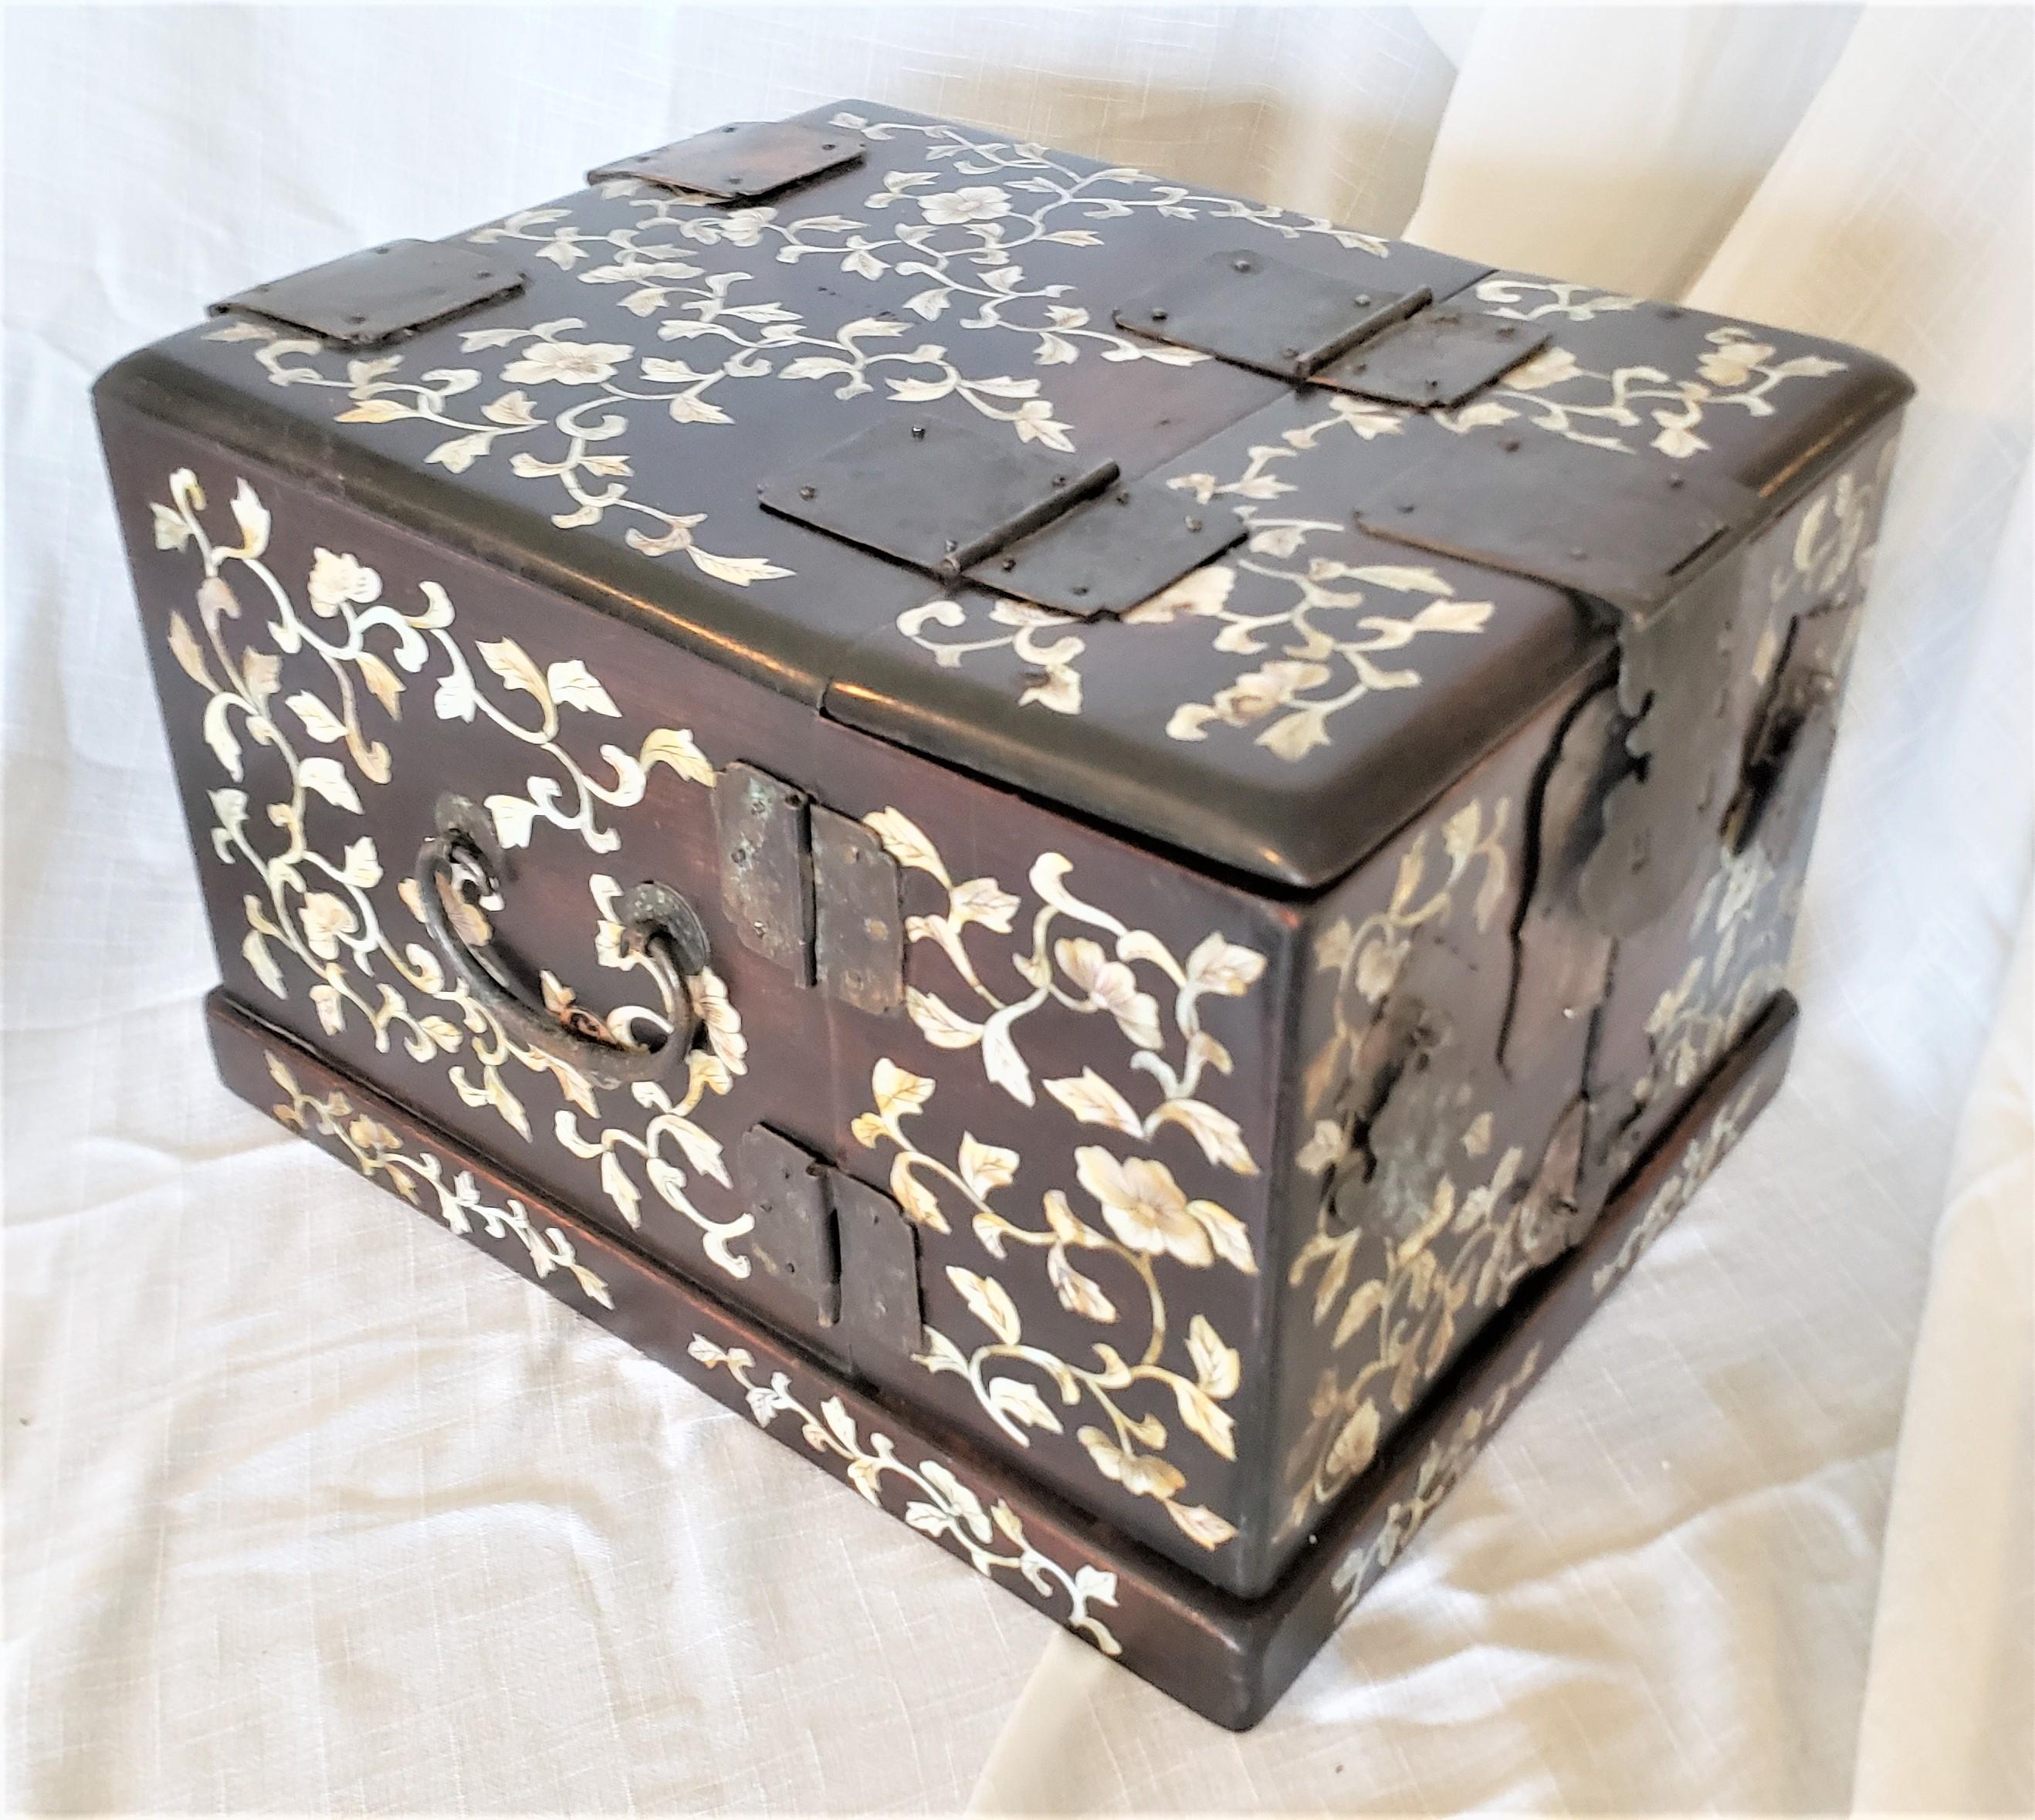 This very elaborate jewelry box or vanity dresser makeup chest is unsigned, but presumed to have been made in China in approximately 1850 in the period Chinese Export style. The box is composed of wood with multiple small drawers and compartments